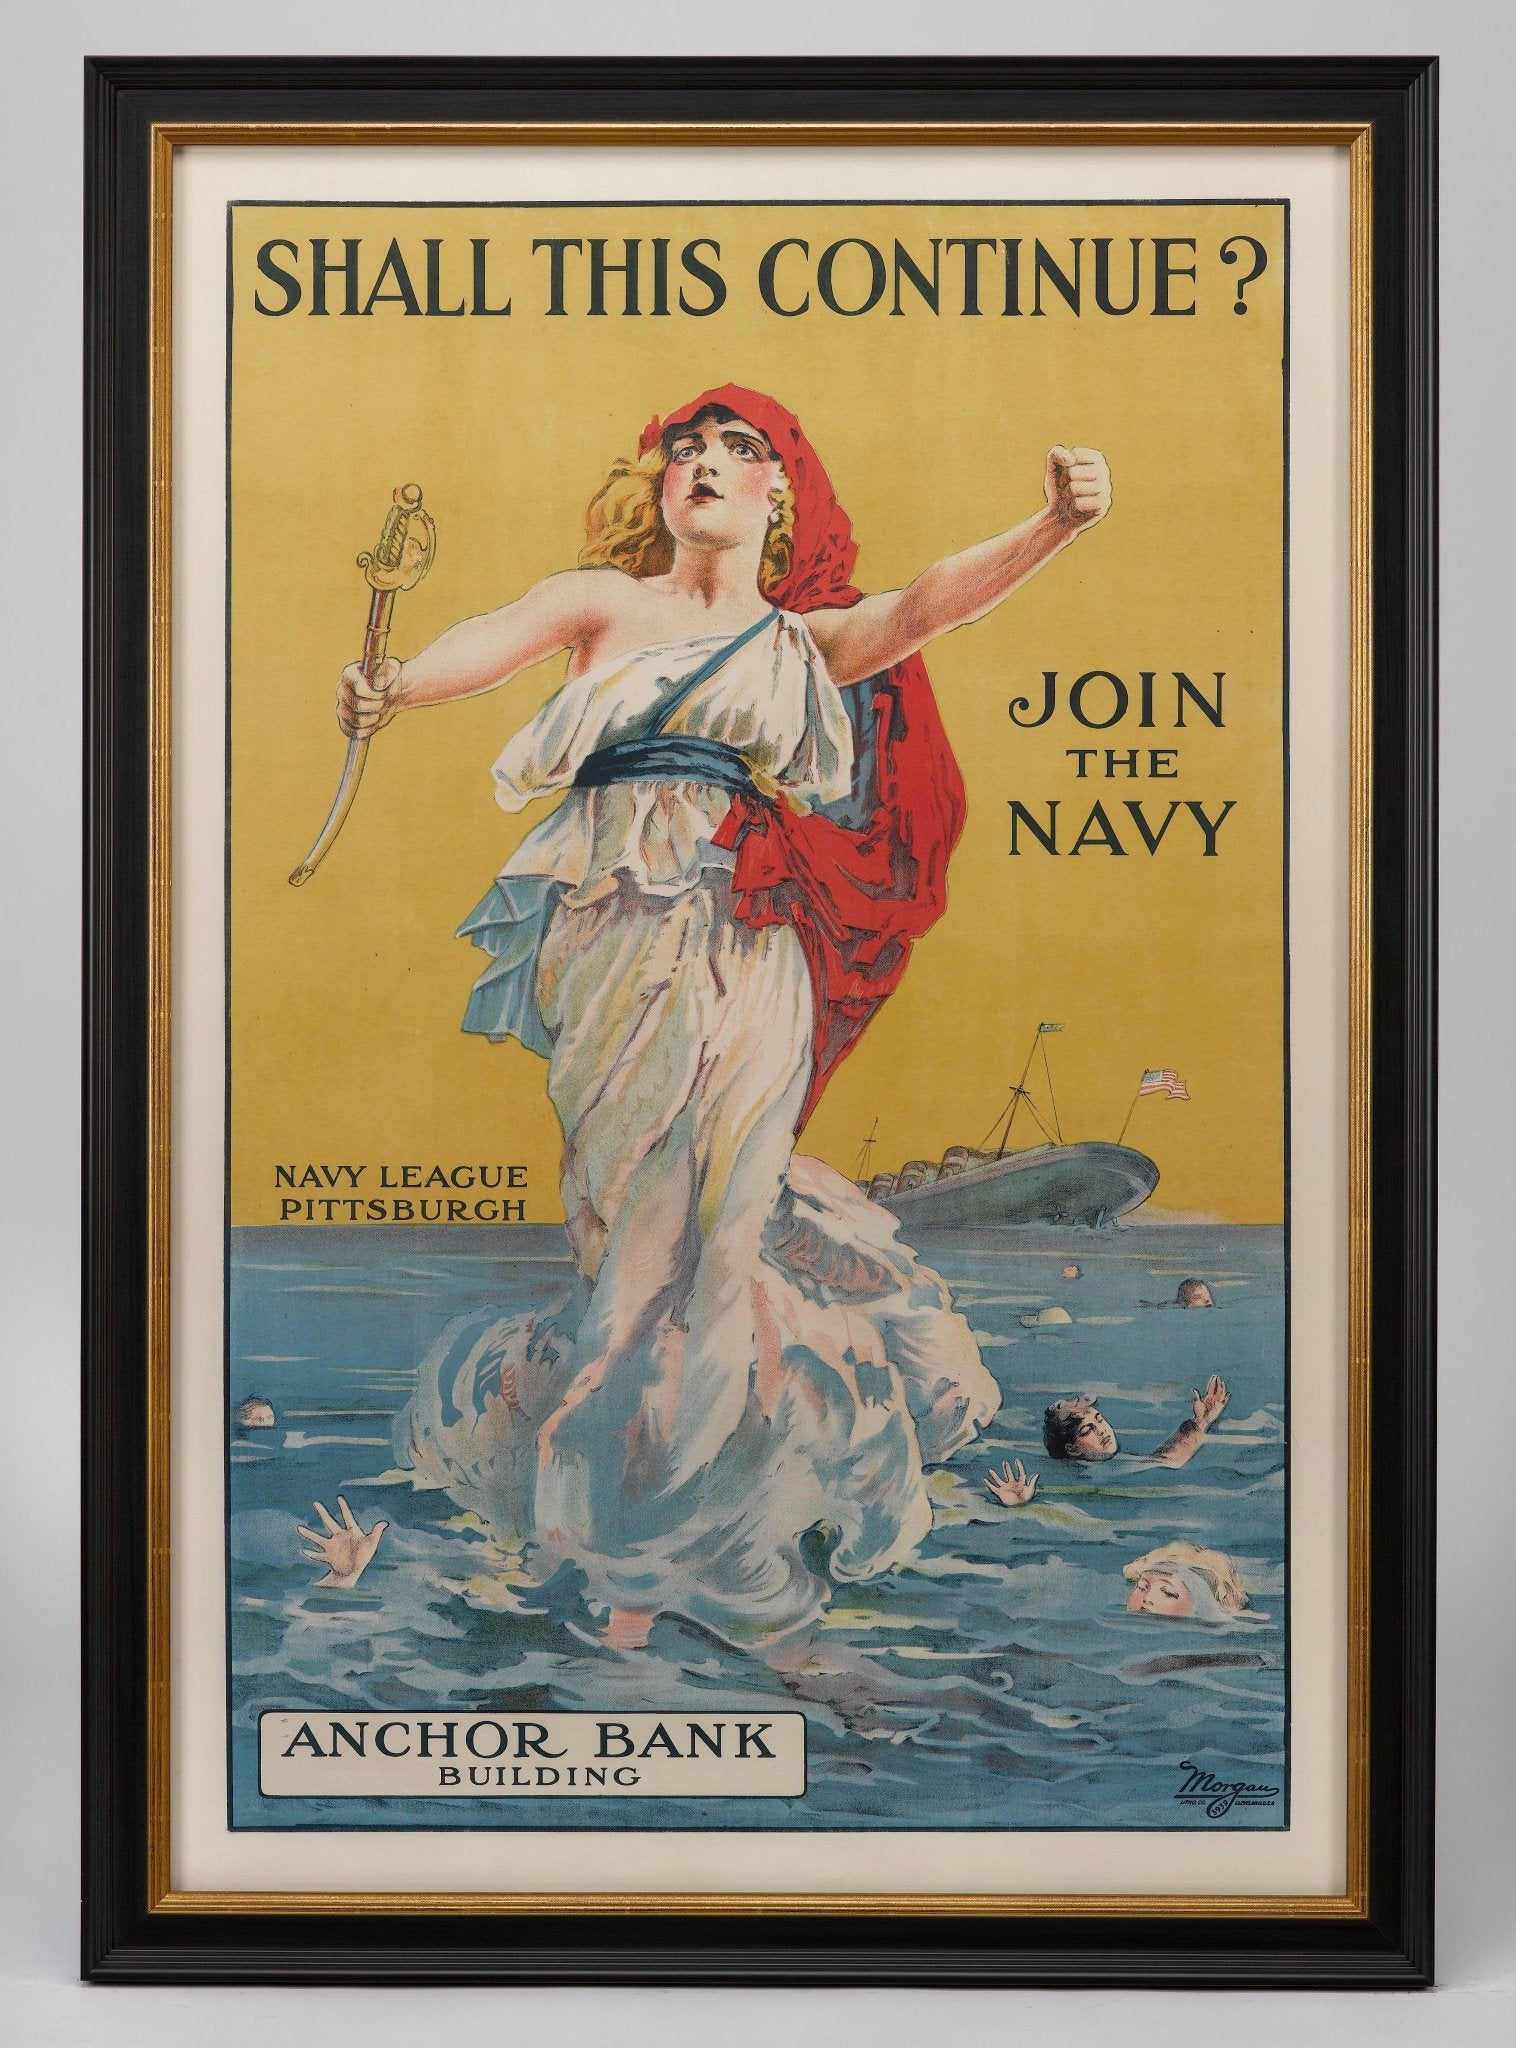 "Shall This Continue? Join the Navy" Vintage Navy Recruitment Poster, circa 1916 - The Great Republic